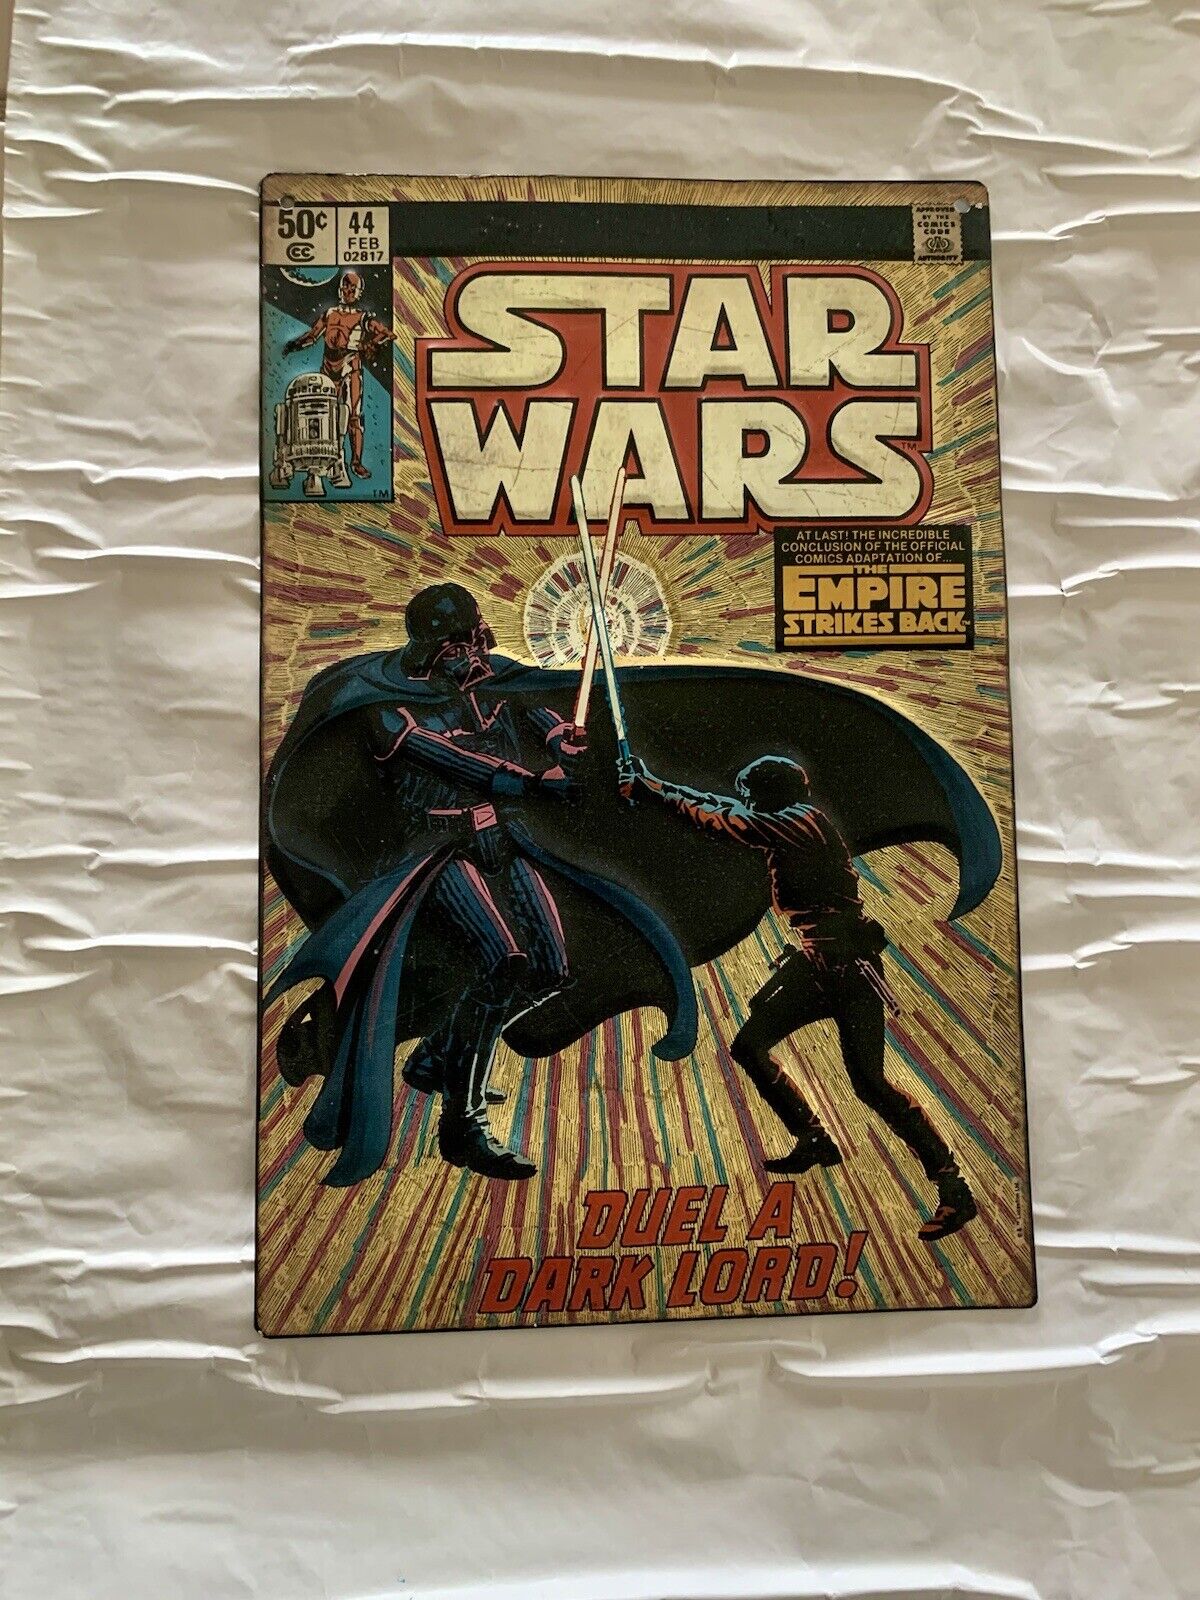 Star Wars Empire Strikes Back Comic Book#44 Cover 3D Embossed Metal Sign 8.5x13”